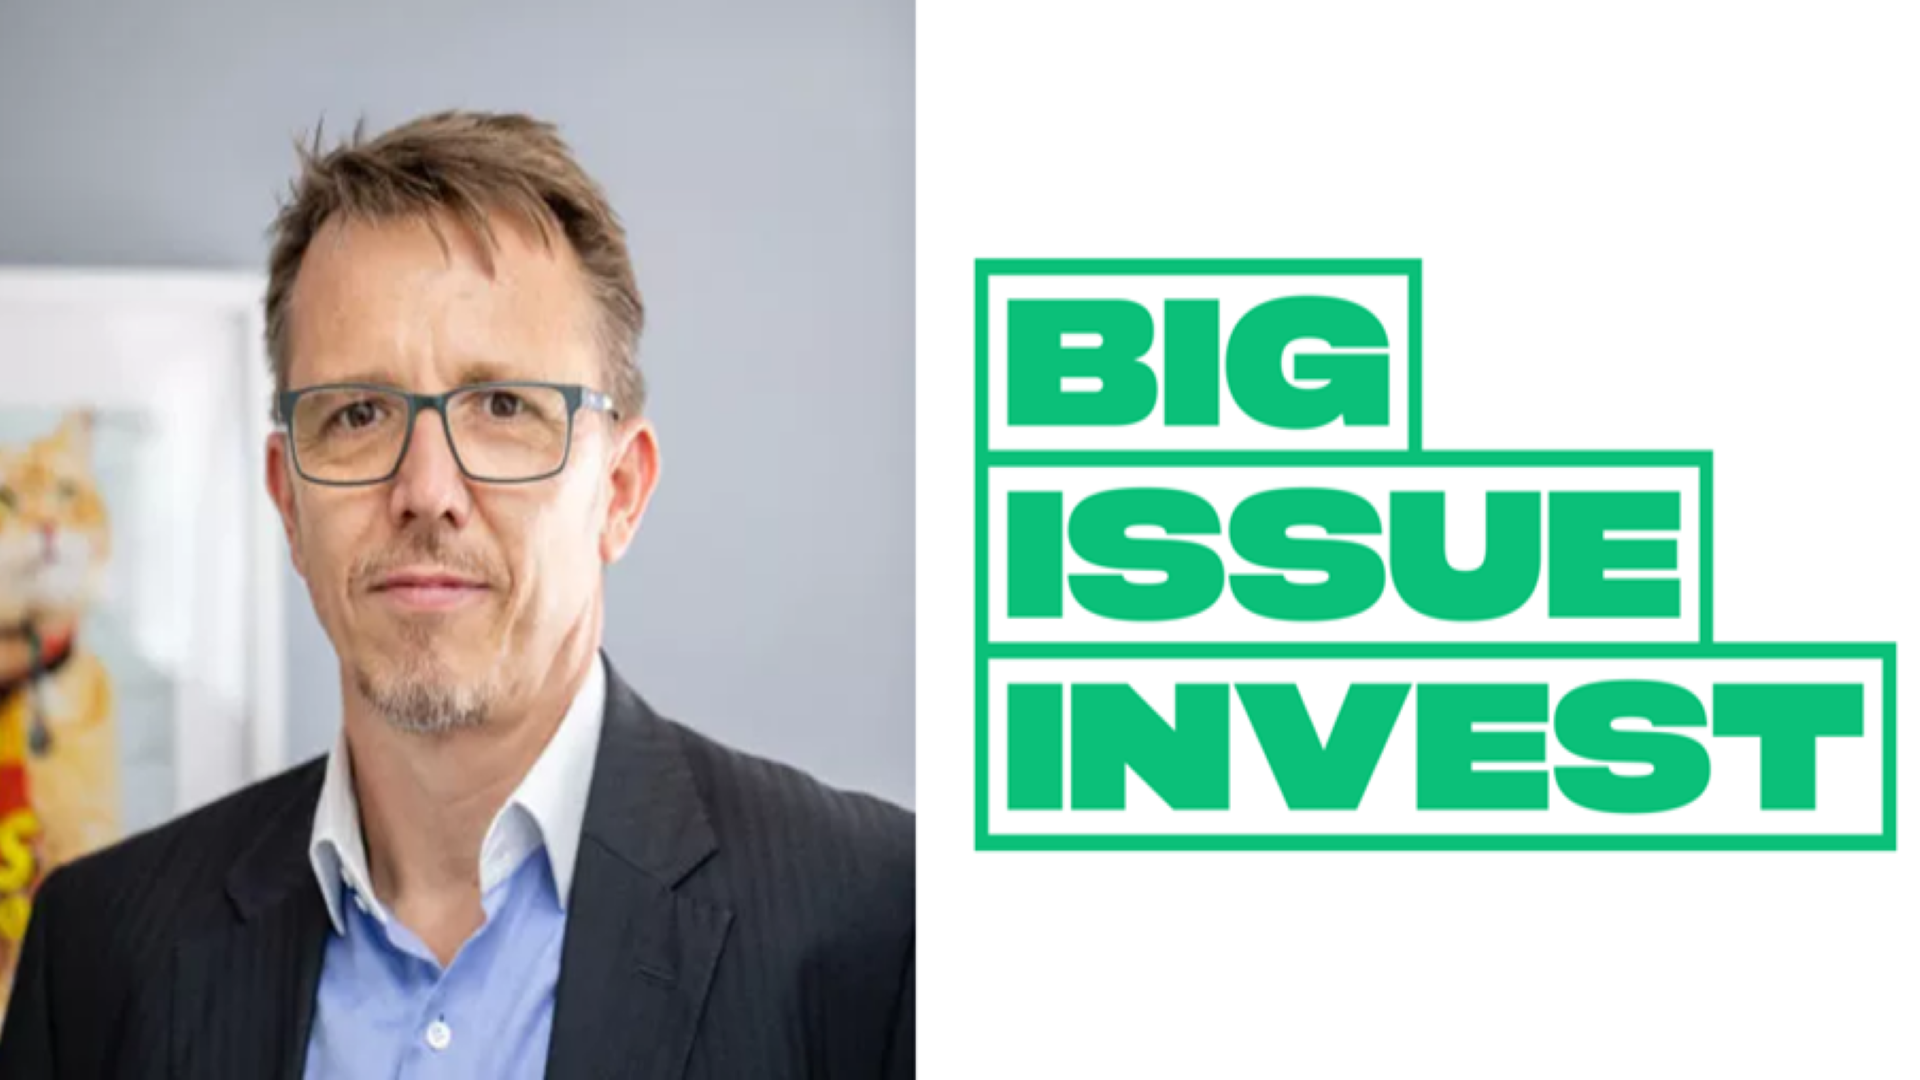 Lars Hagelmann, Head of Investments at Big Issue Invest